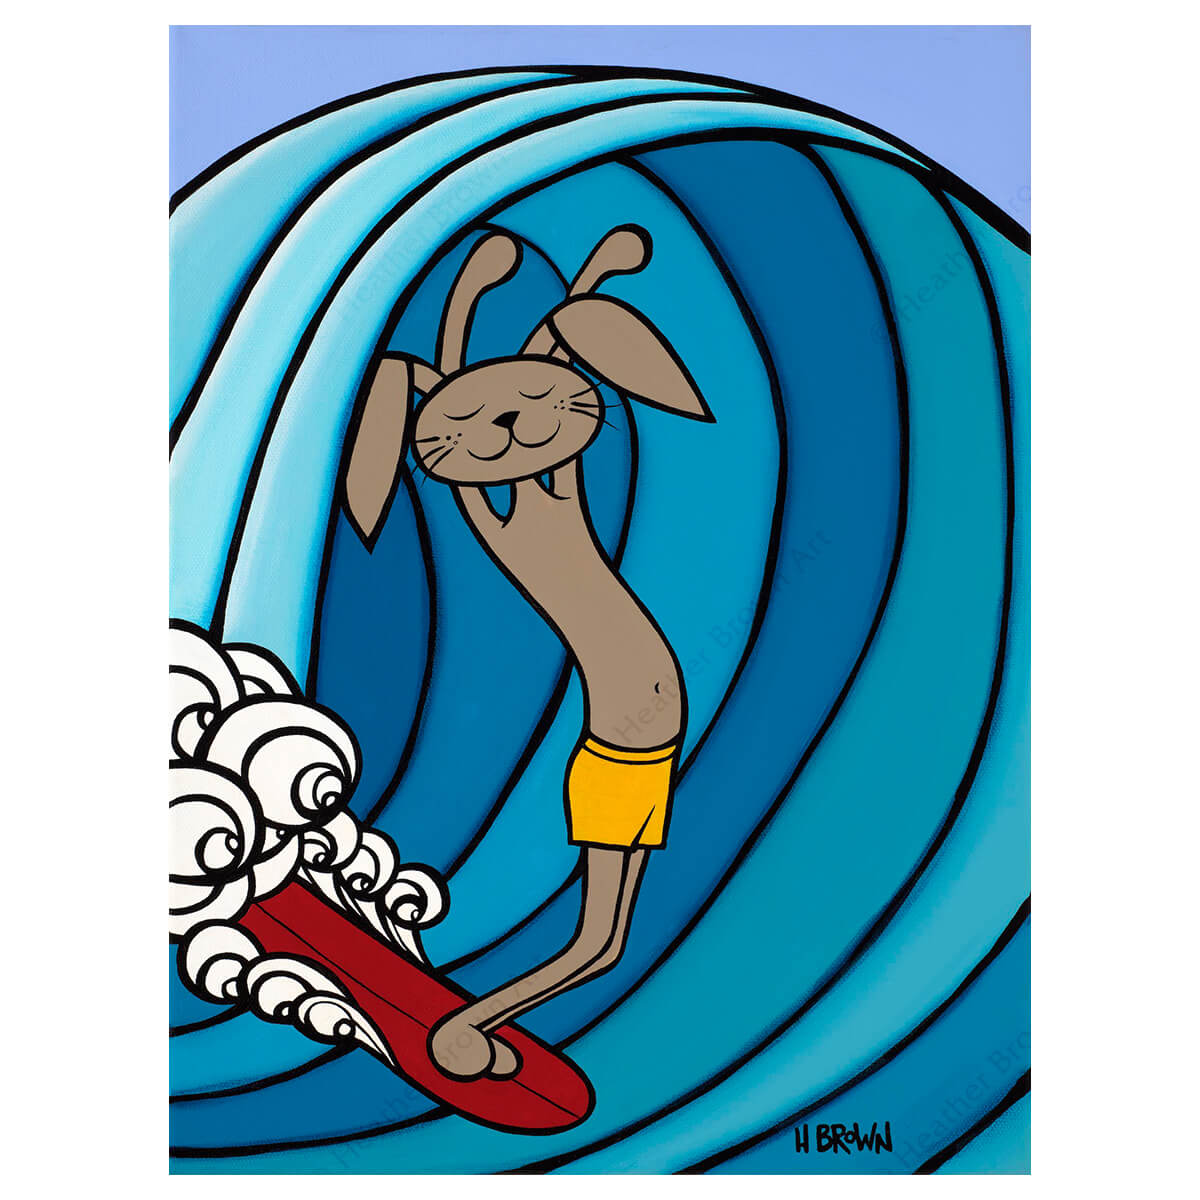 Original Hawaii art by Heather Brown featuring a brave bunny surfing a wave on a red surfboard.